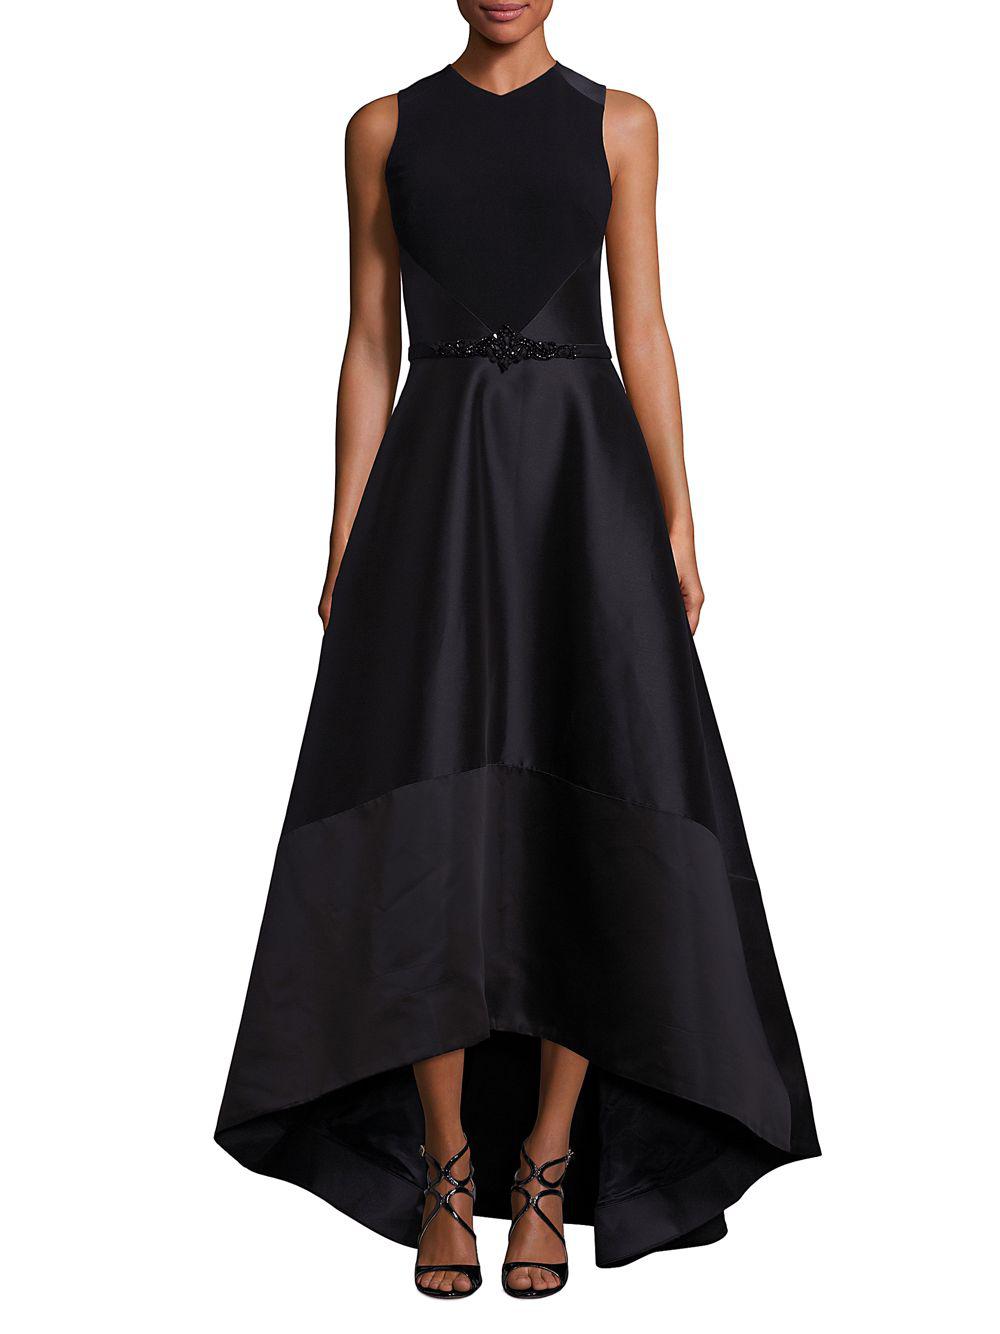 THEIA Hi-lo Racerback Ball Gown in Black - Lyst